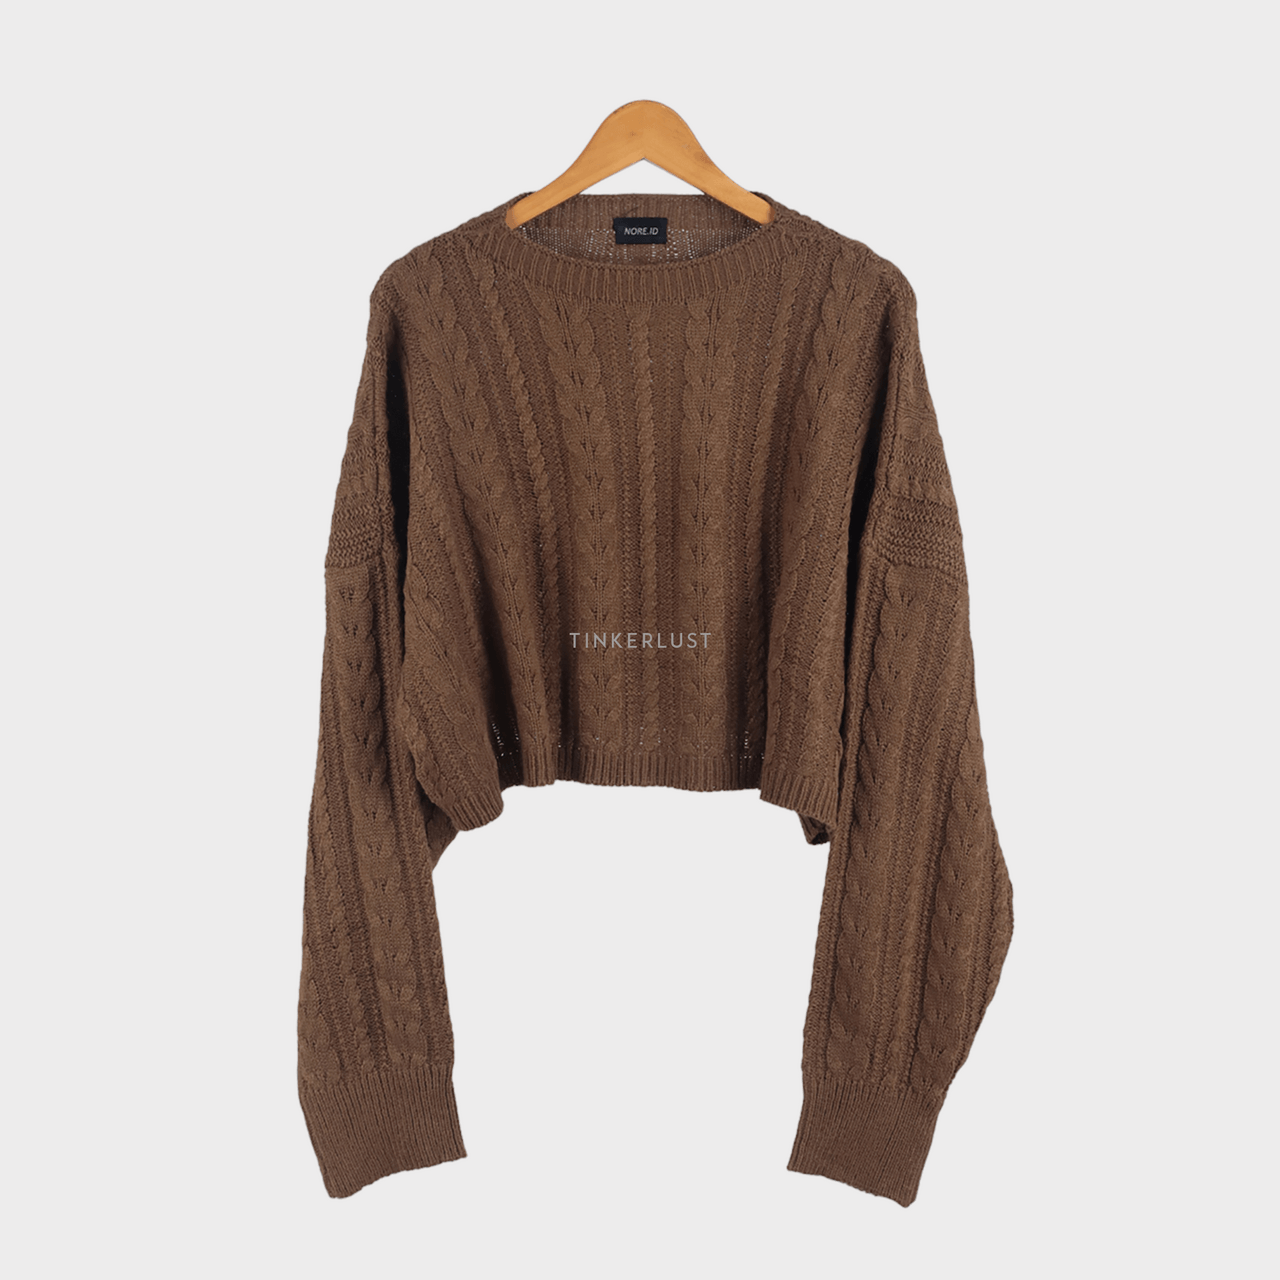 Nore.id Olive Sweater